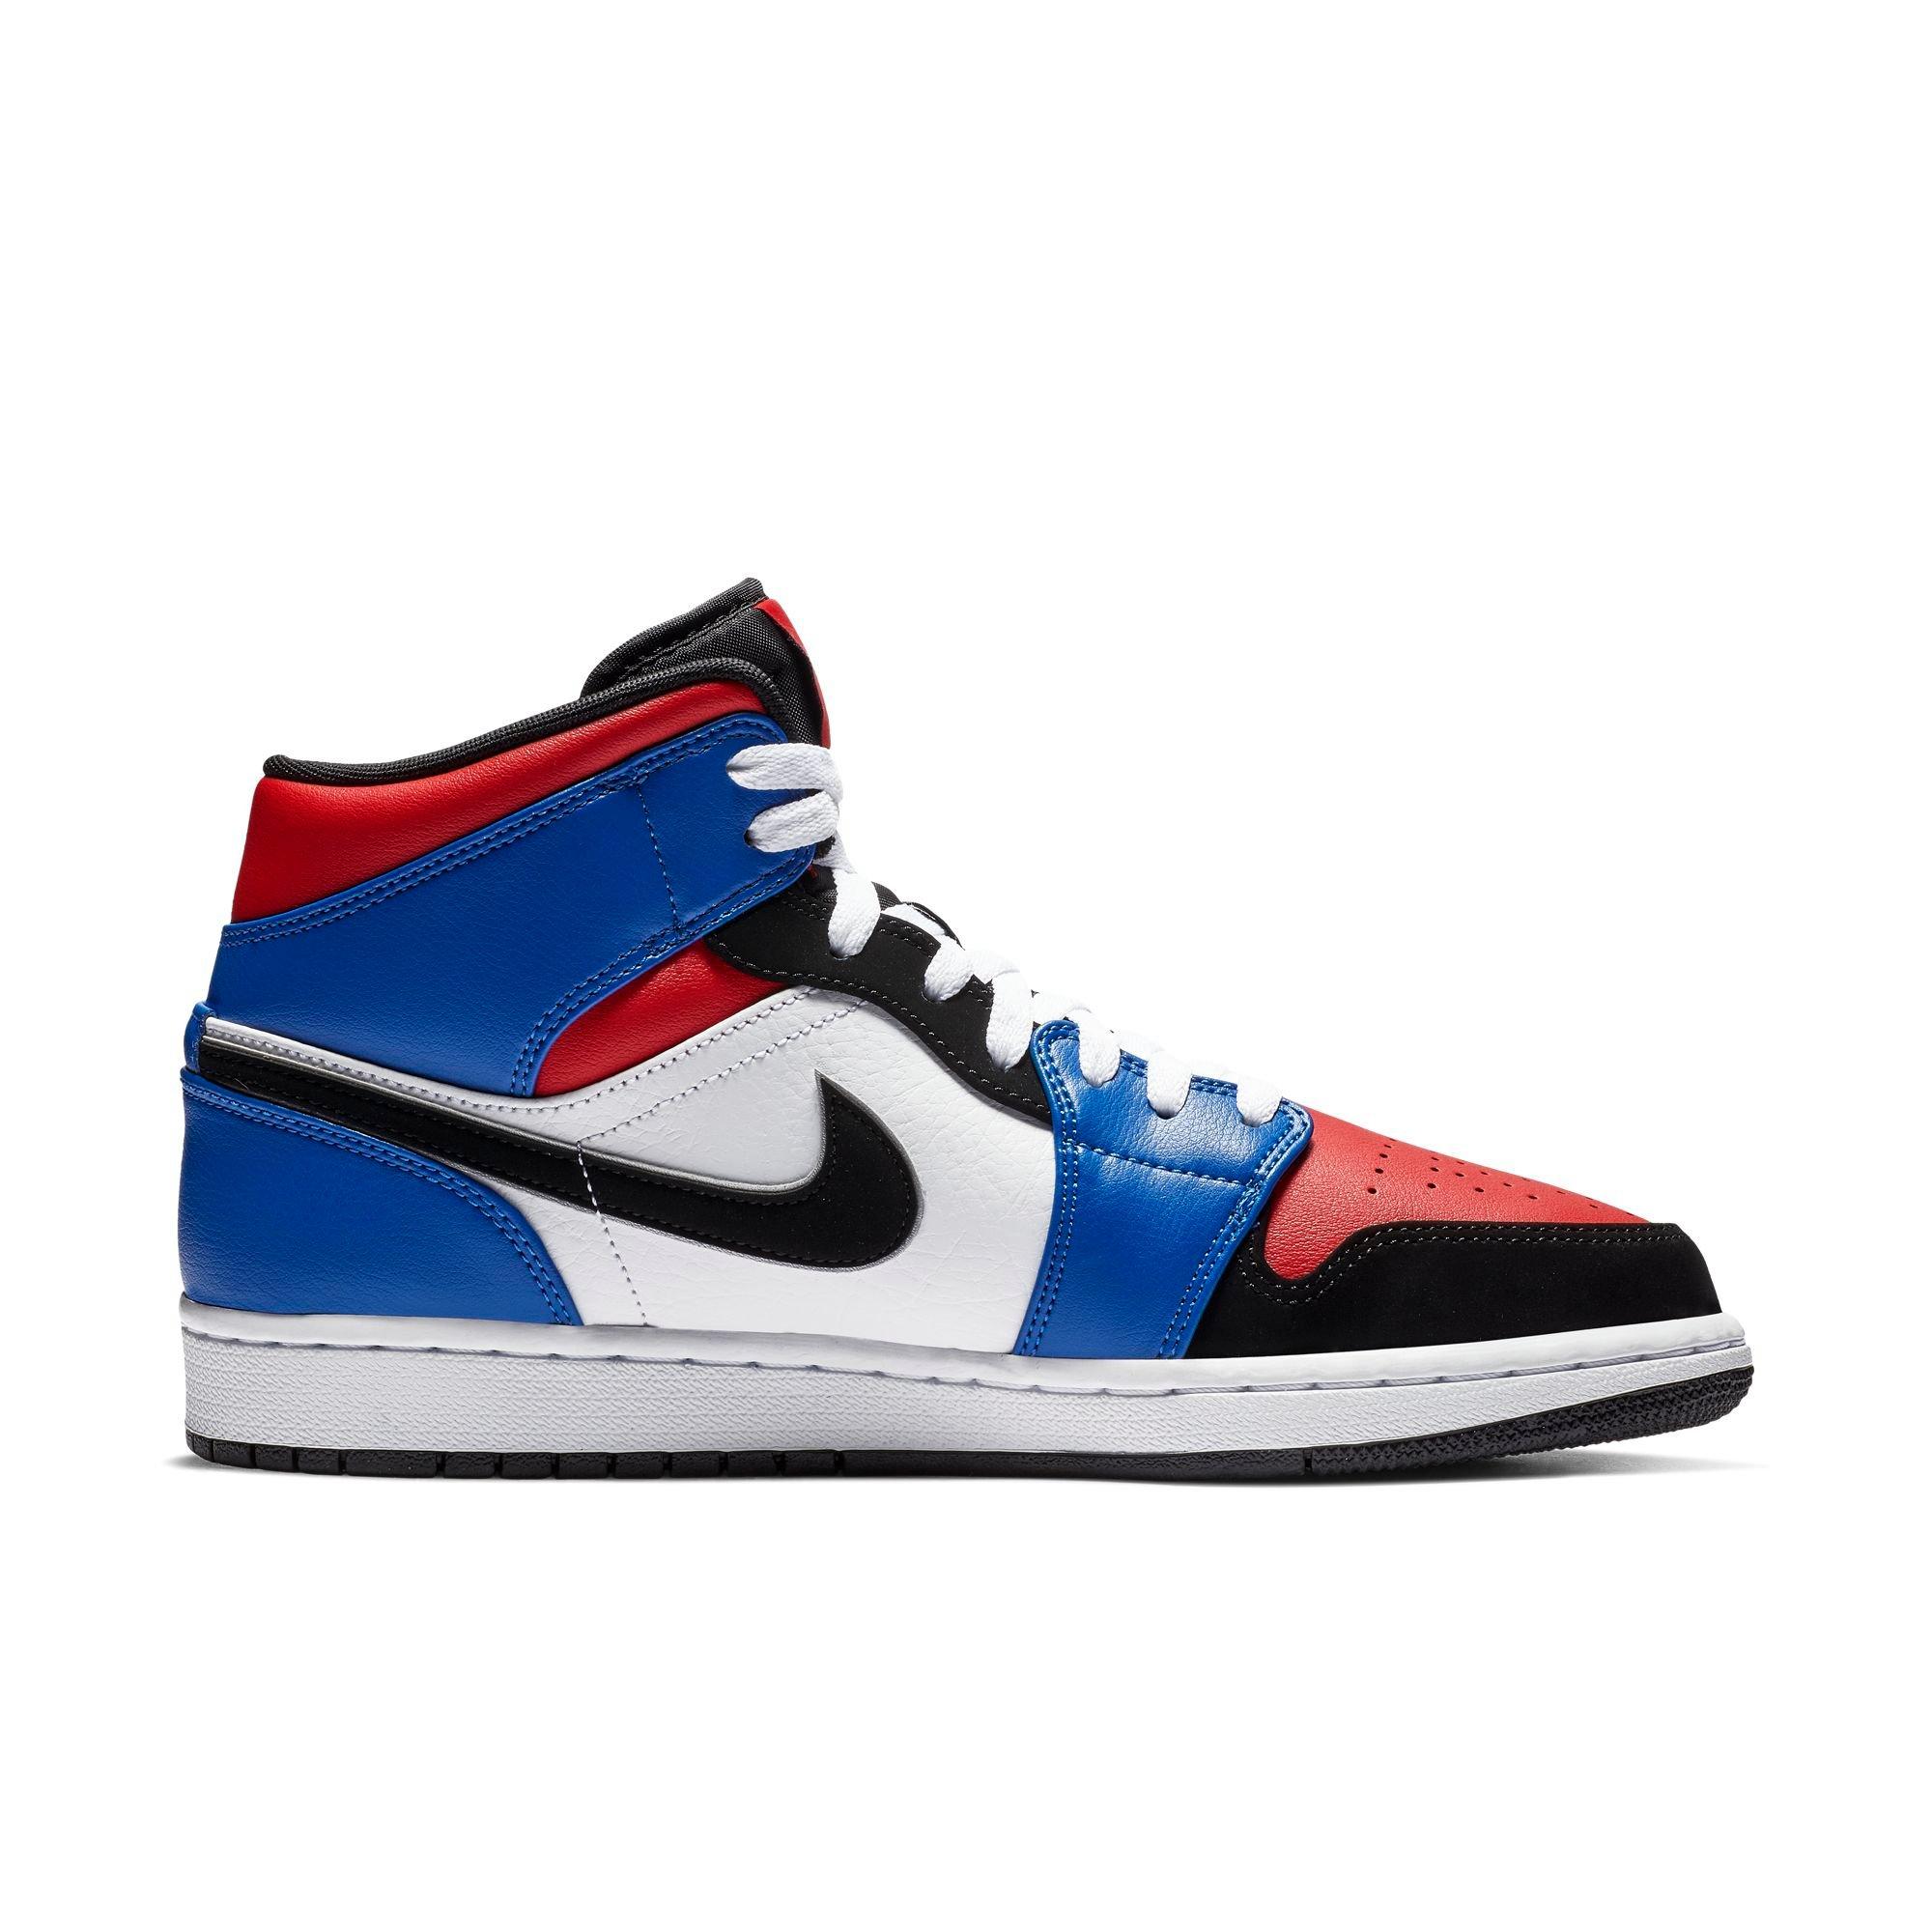 jordan one red and blue